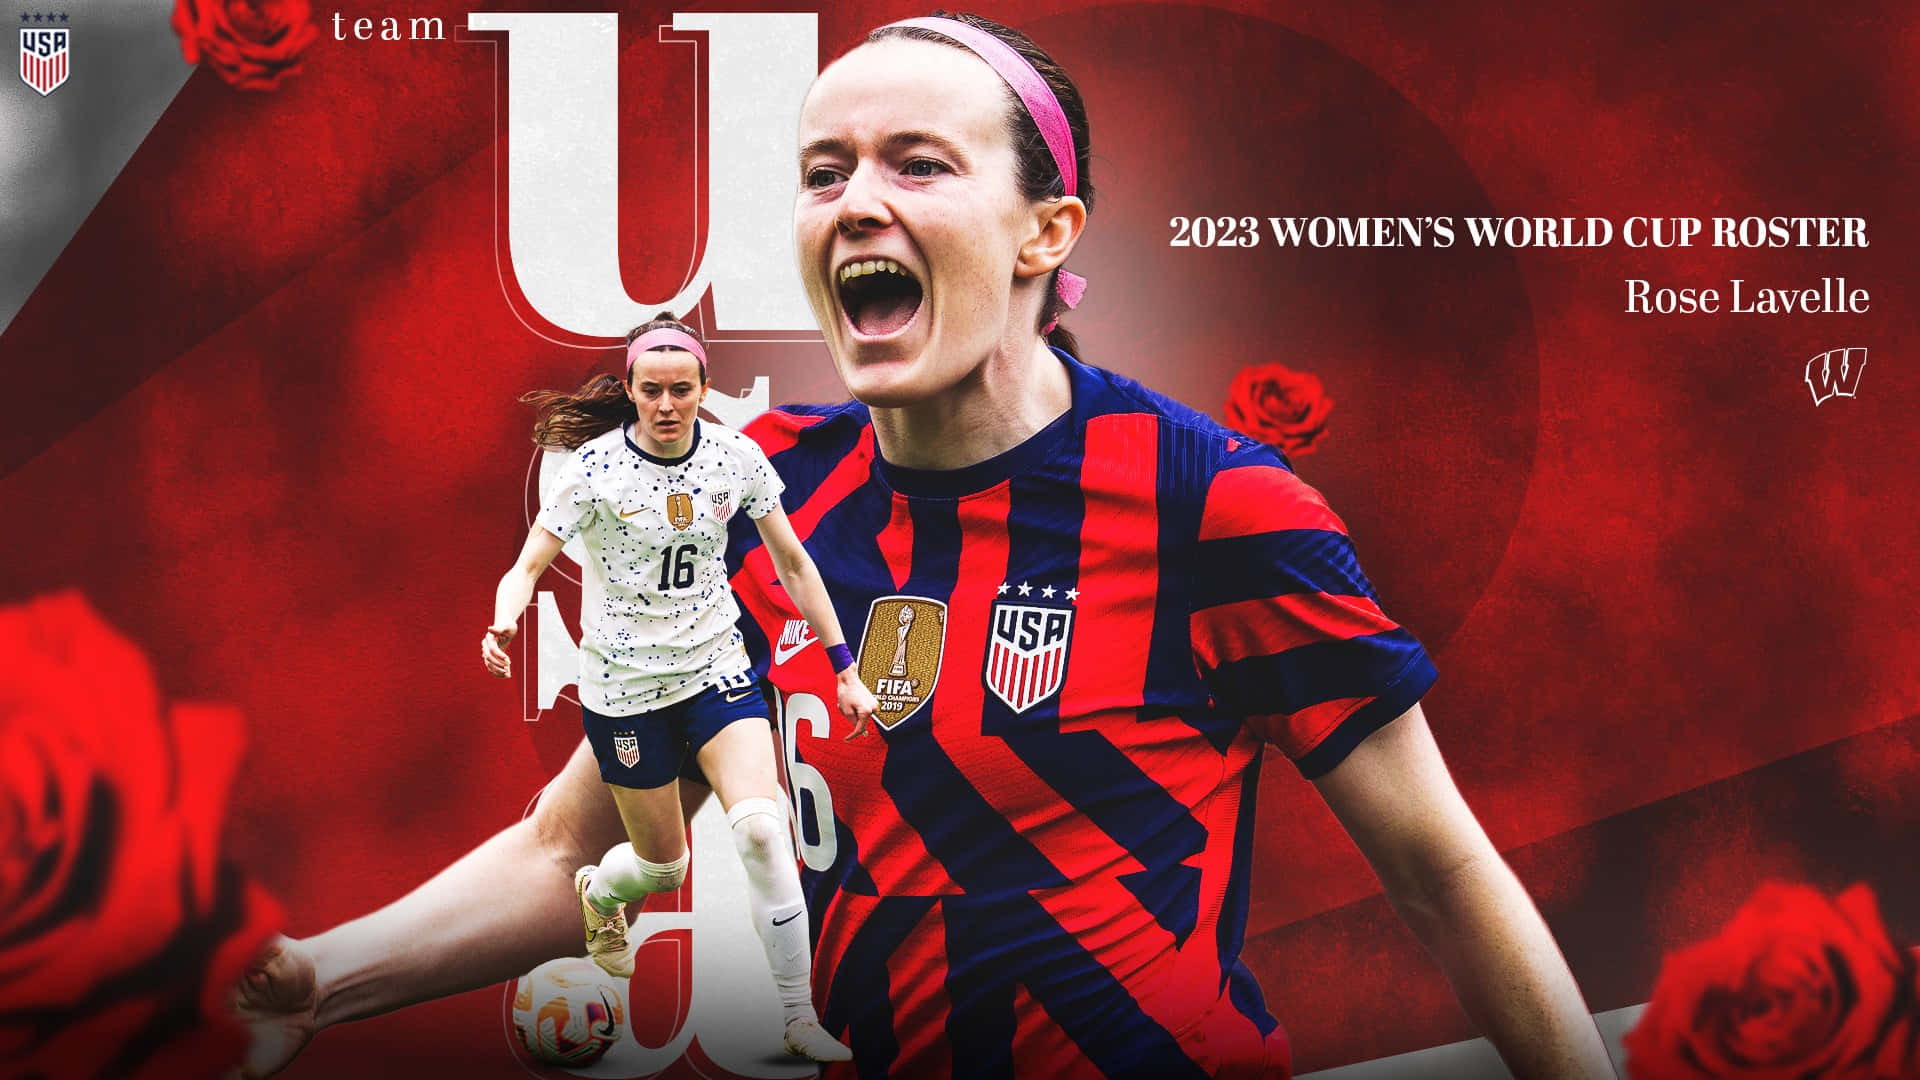 Rose Lavelle2023 World Cup Roster Announcement Wallpaper